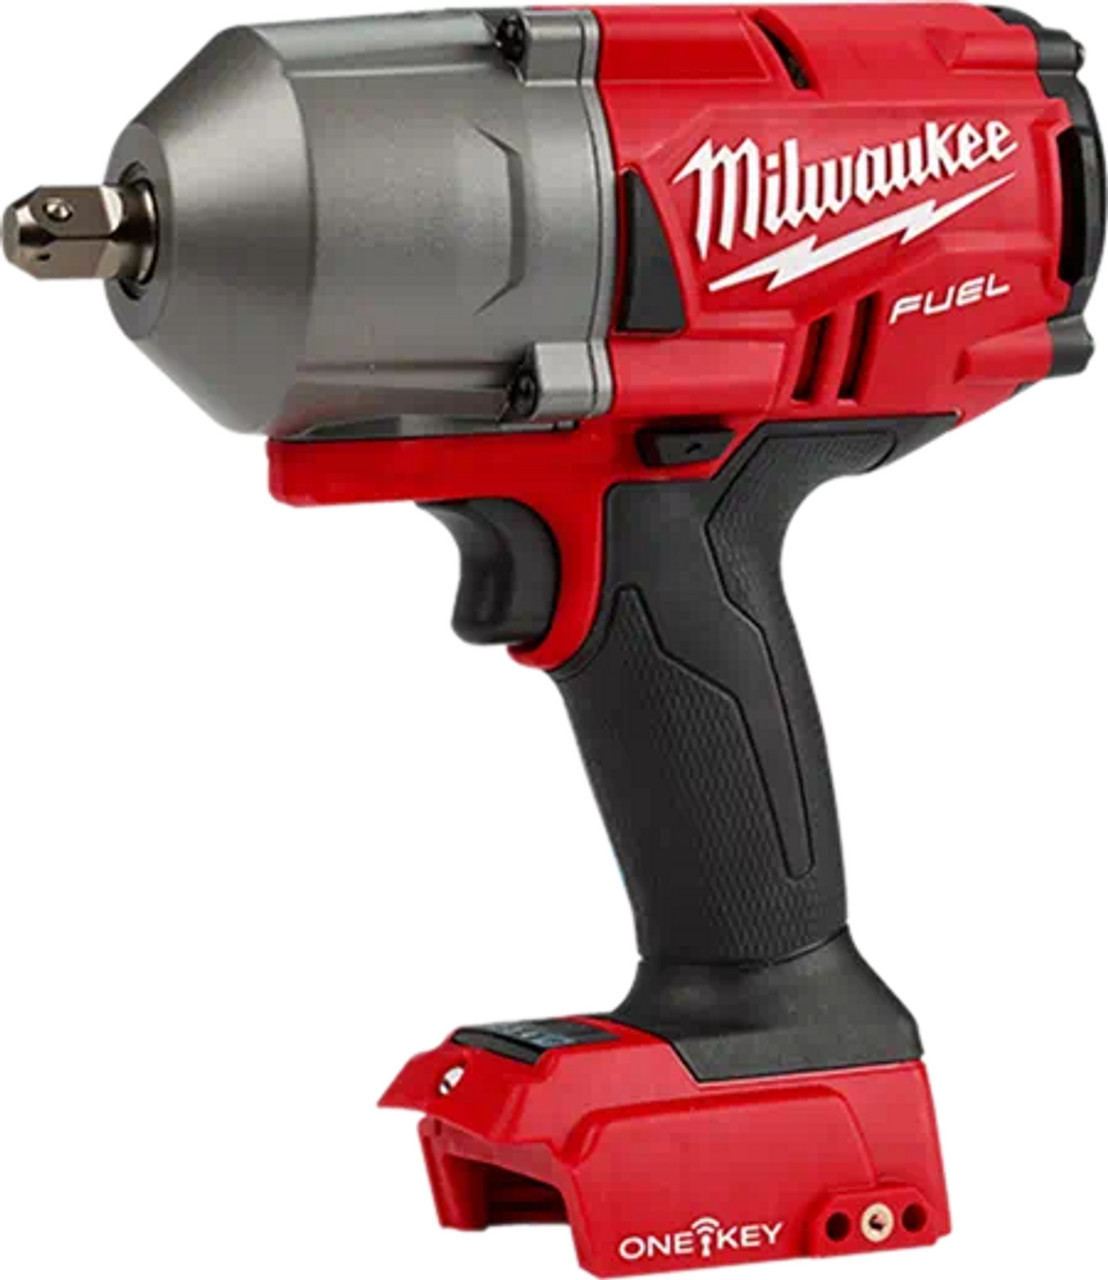 M18 FUEL w/ ONE-KEY High Torque Impact Wrench 1/2" Pin Detent Bare Tool